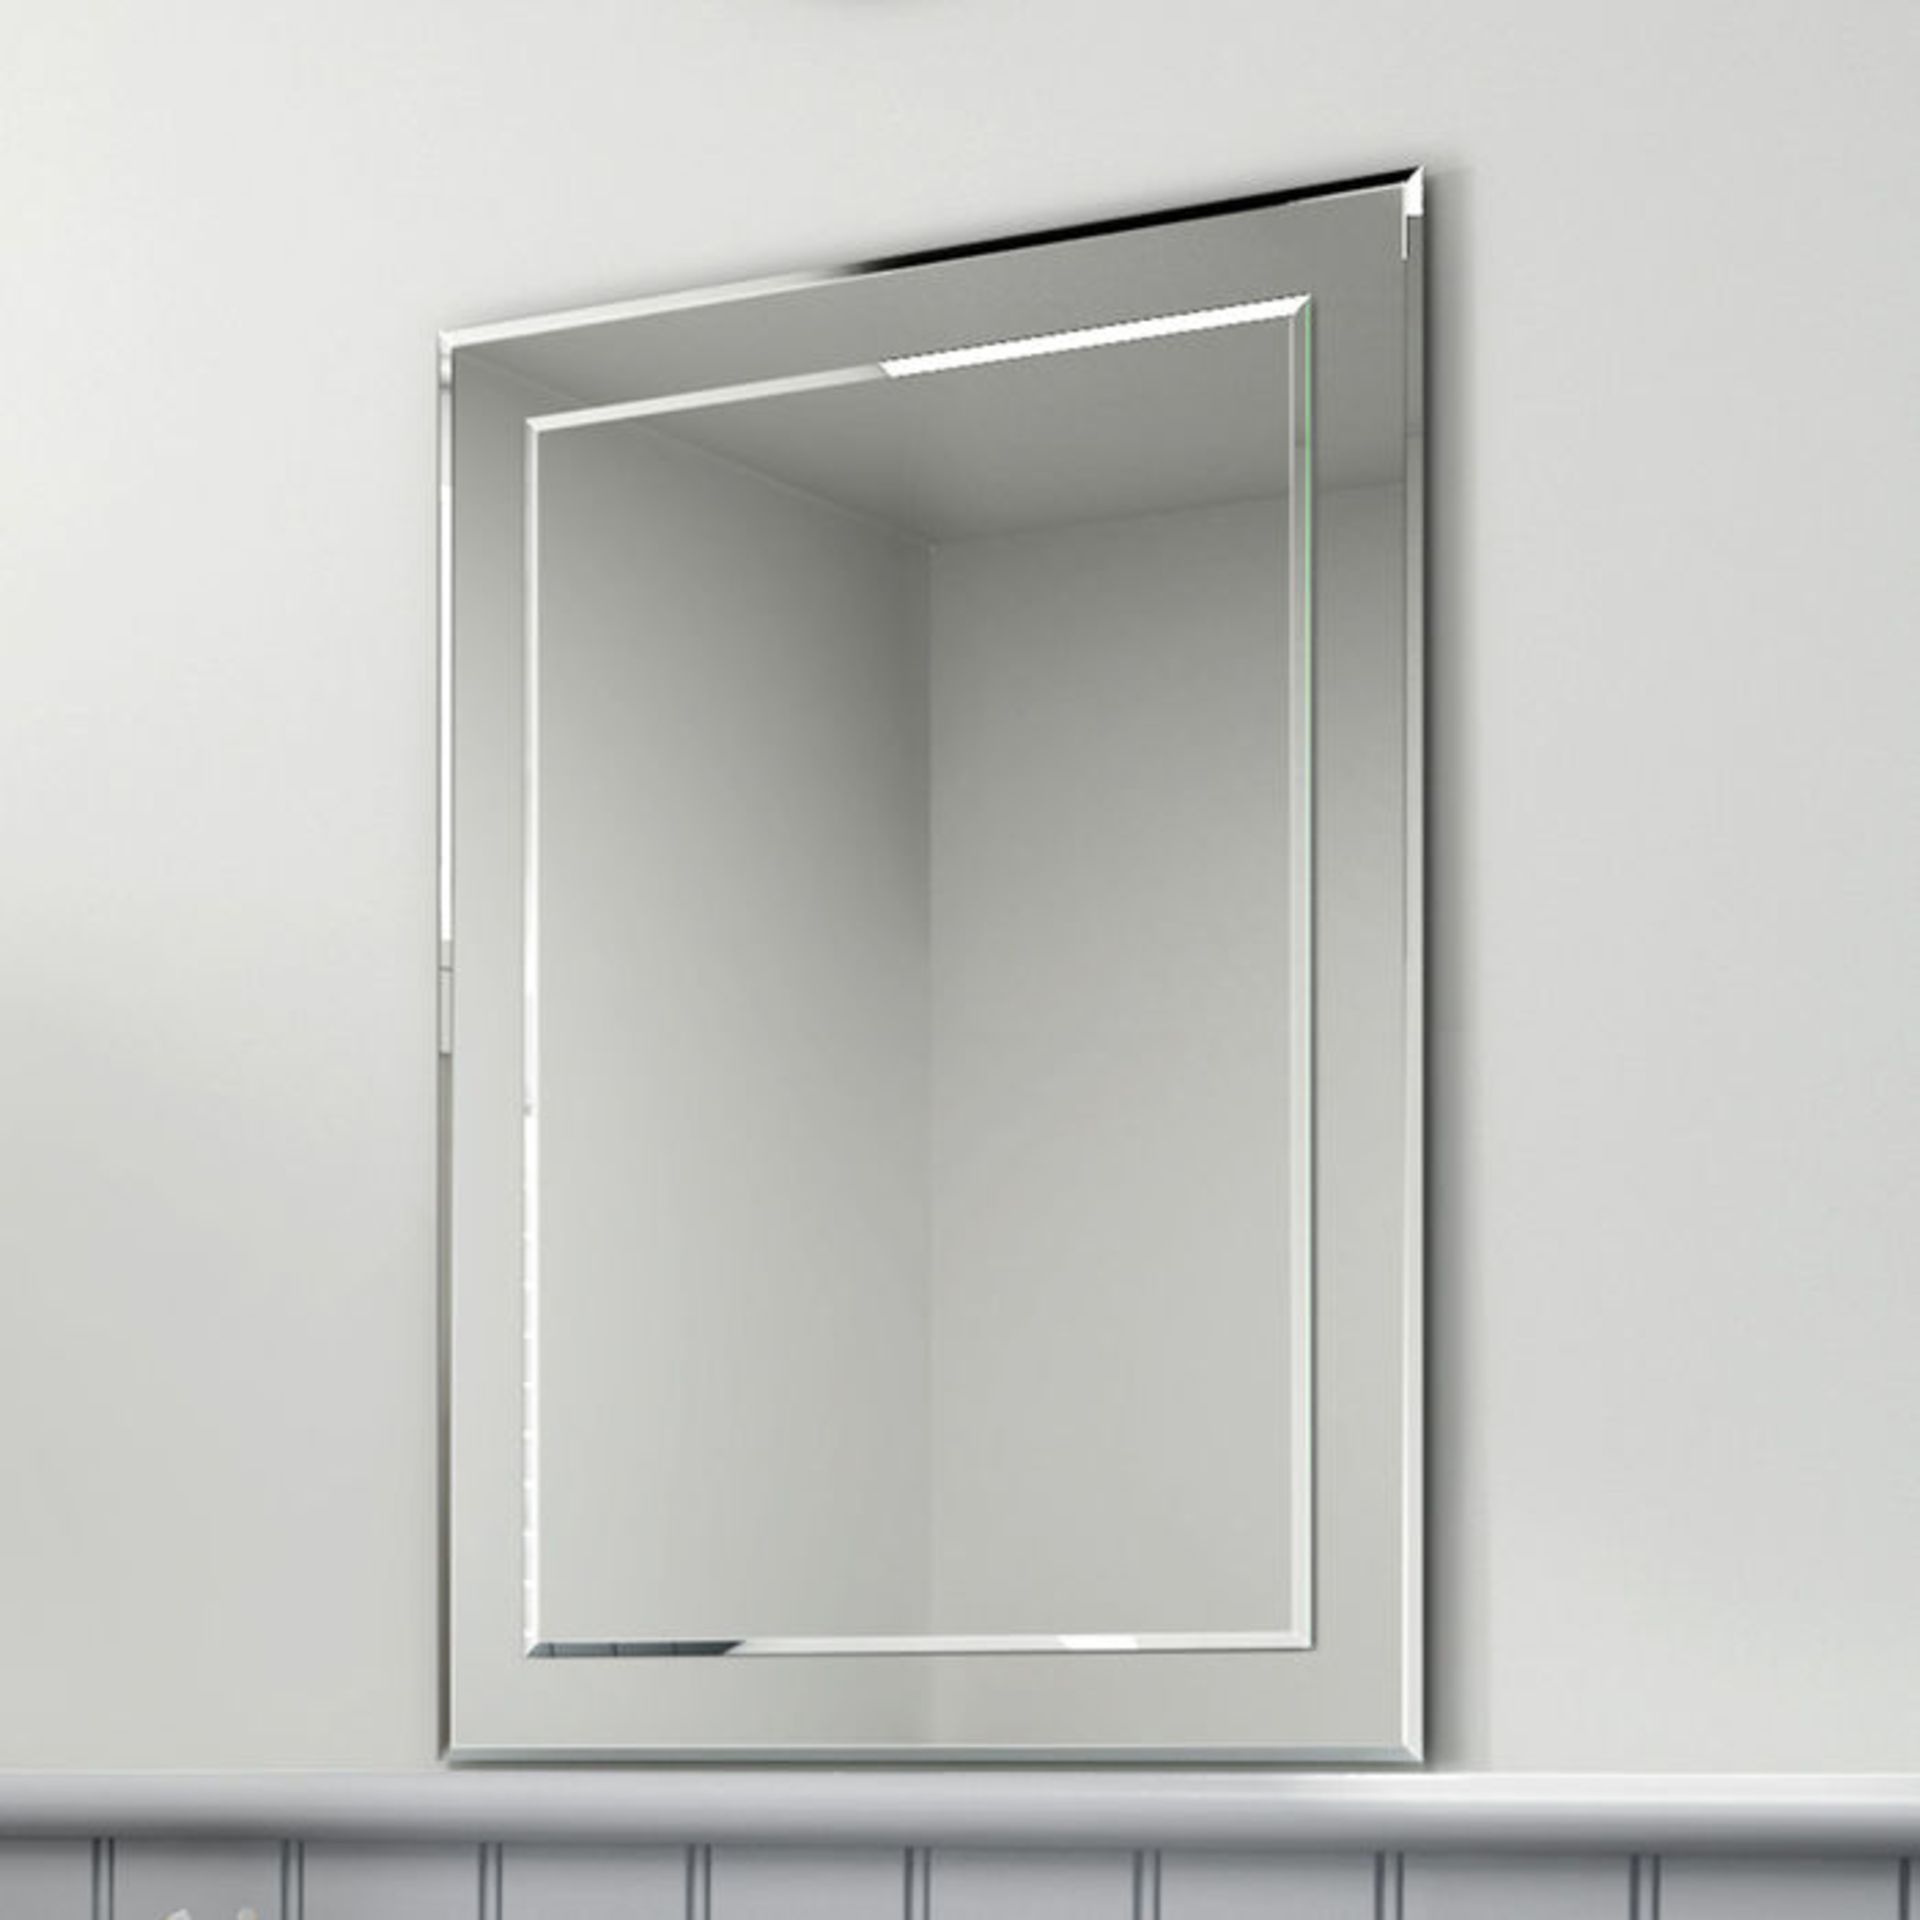 (O128) 500x700mm Bevel Mirror. RRP £69.99. Smooth beveled edge for additional safety and style